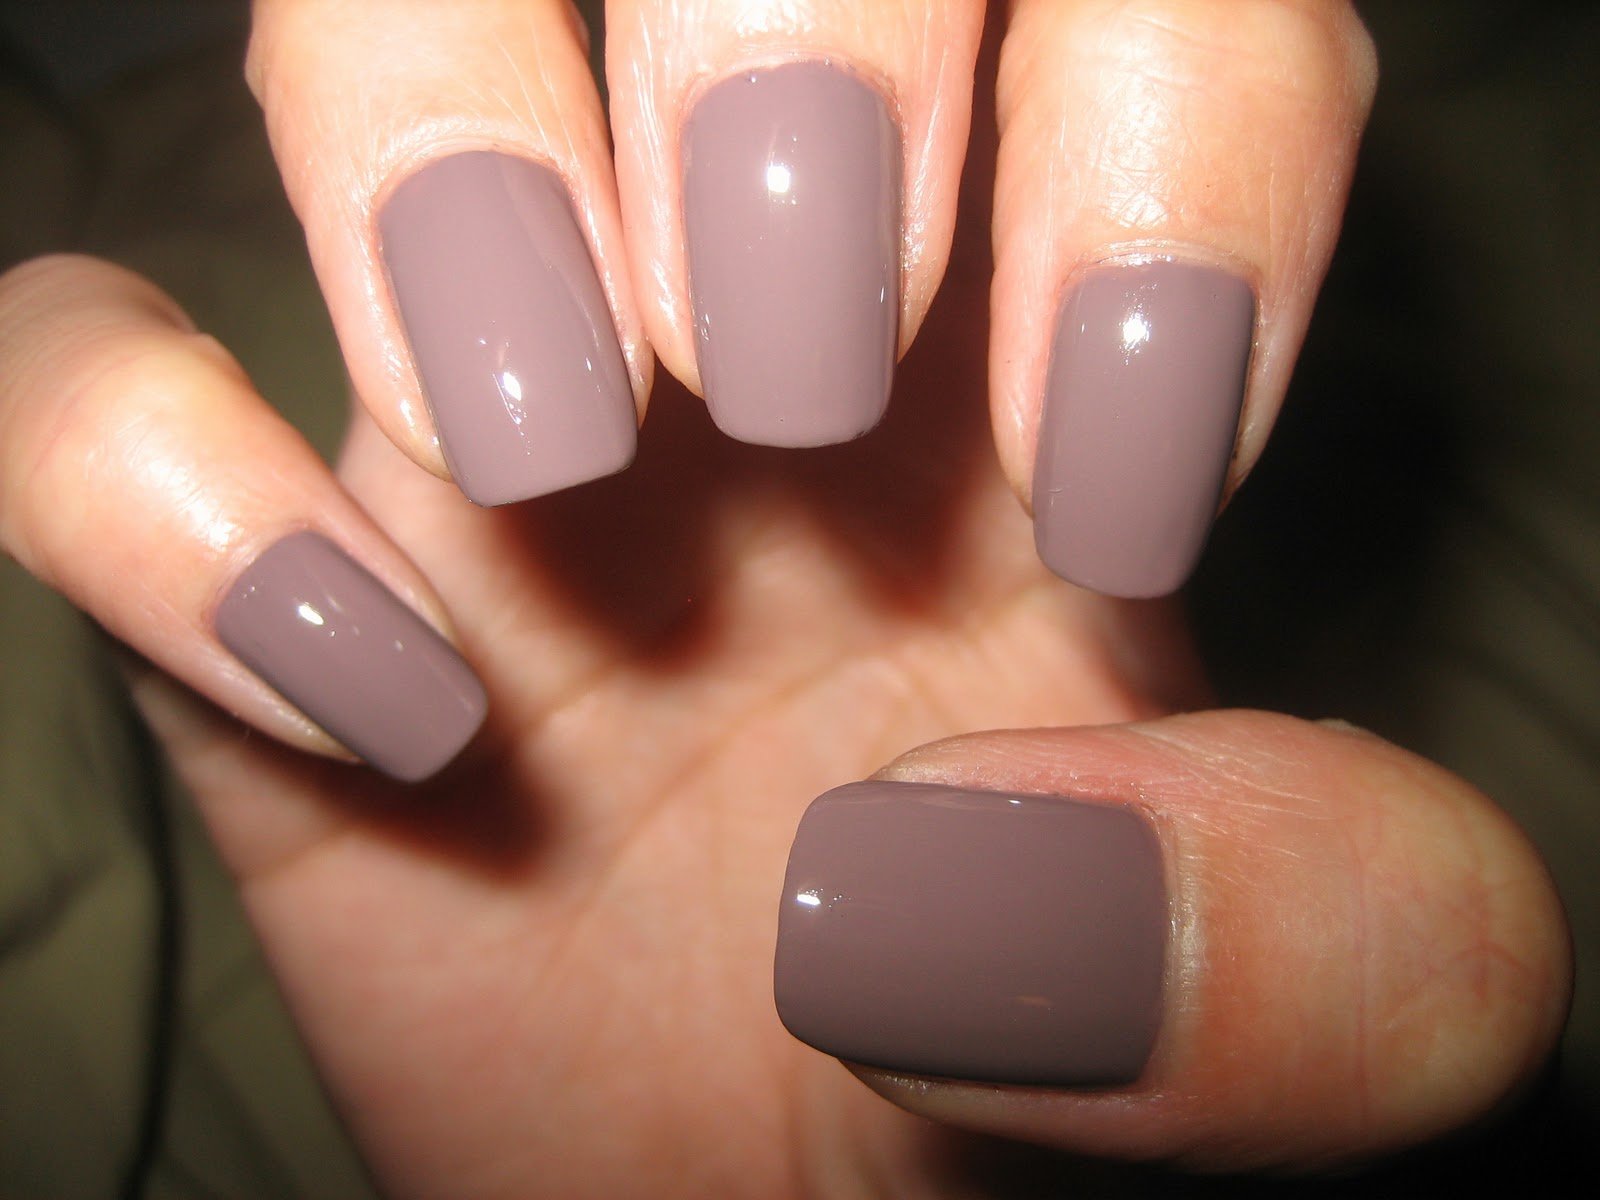 9. "November Nail Ideas: Stiletto Nails in Warm and Cozy Colors" - wide 9